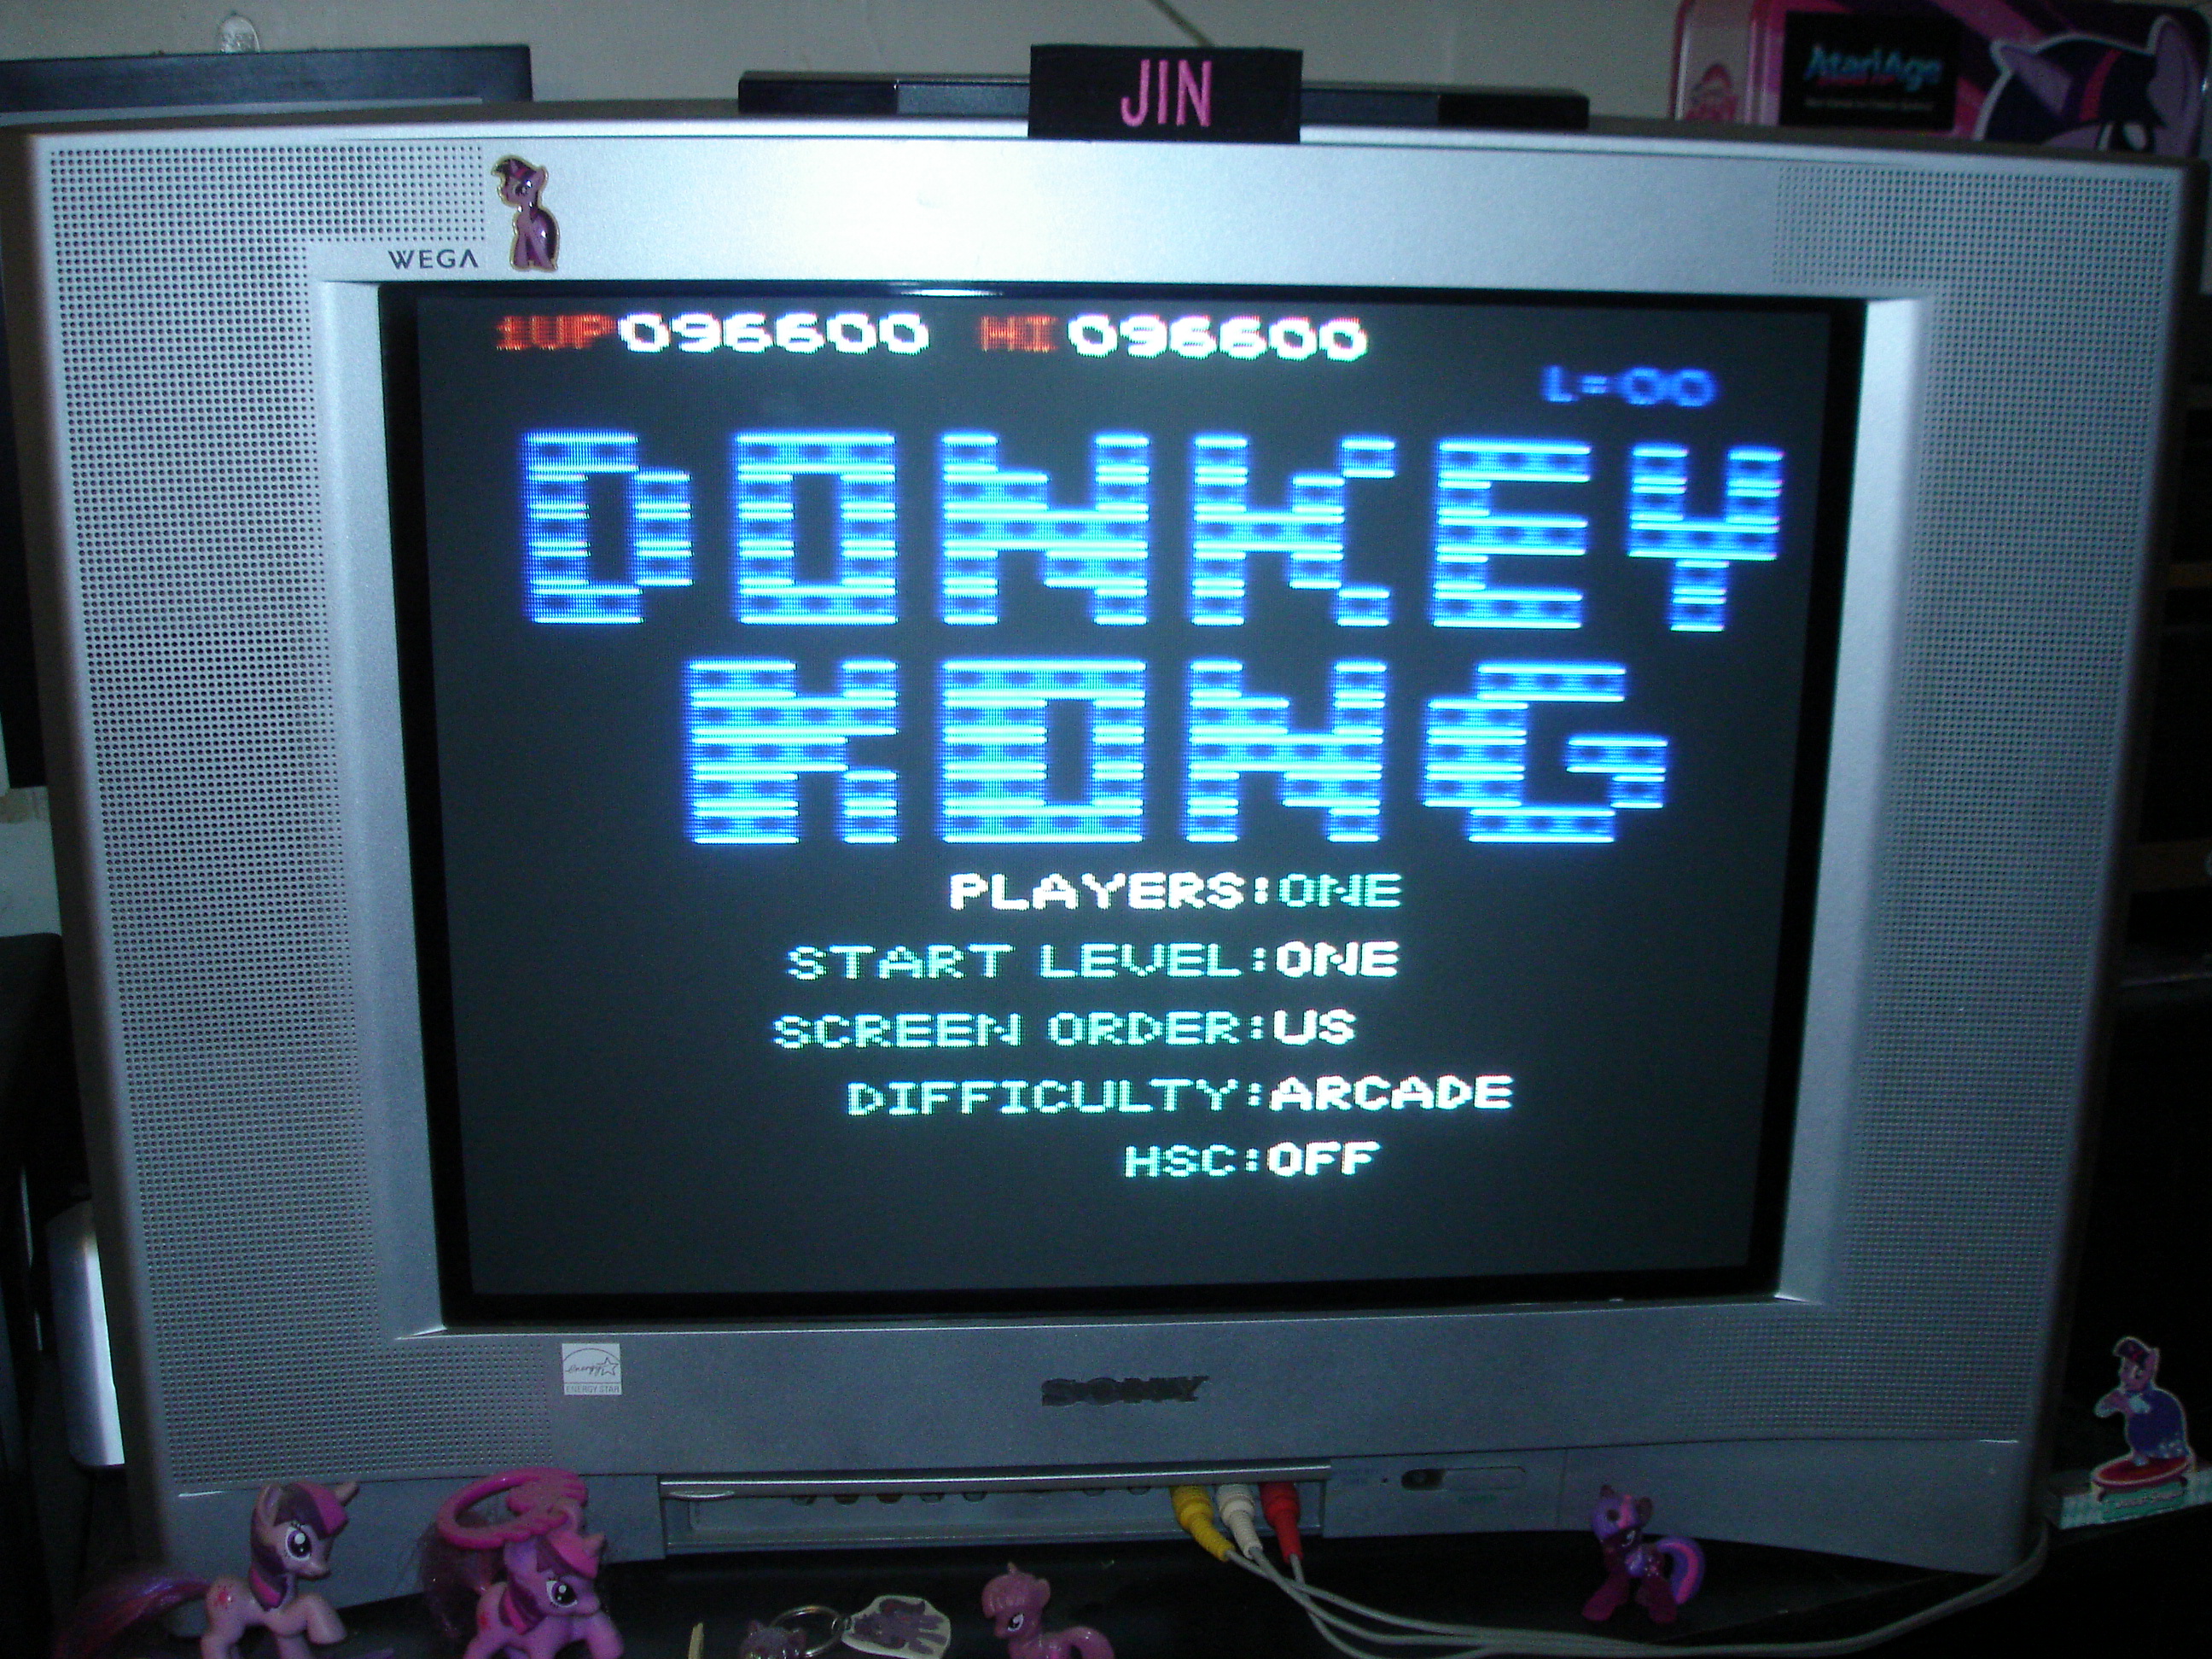 Jin: Donkey Kong PK [Start Level: One] [Screen Order: US] [Difficulty: Arcade] (Atari 7800) 96,600 points on 2018-01-04 09:50:16